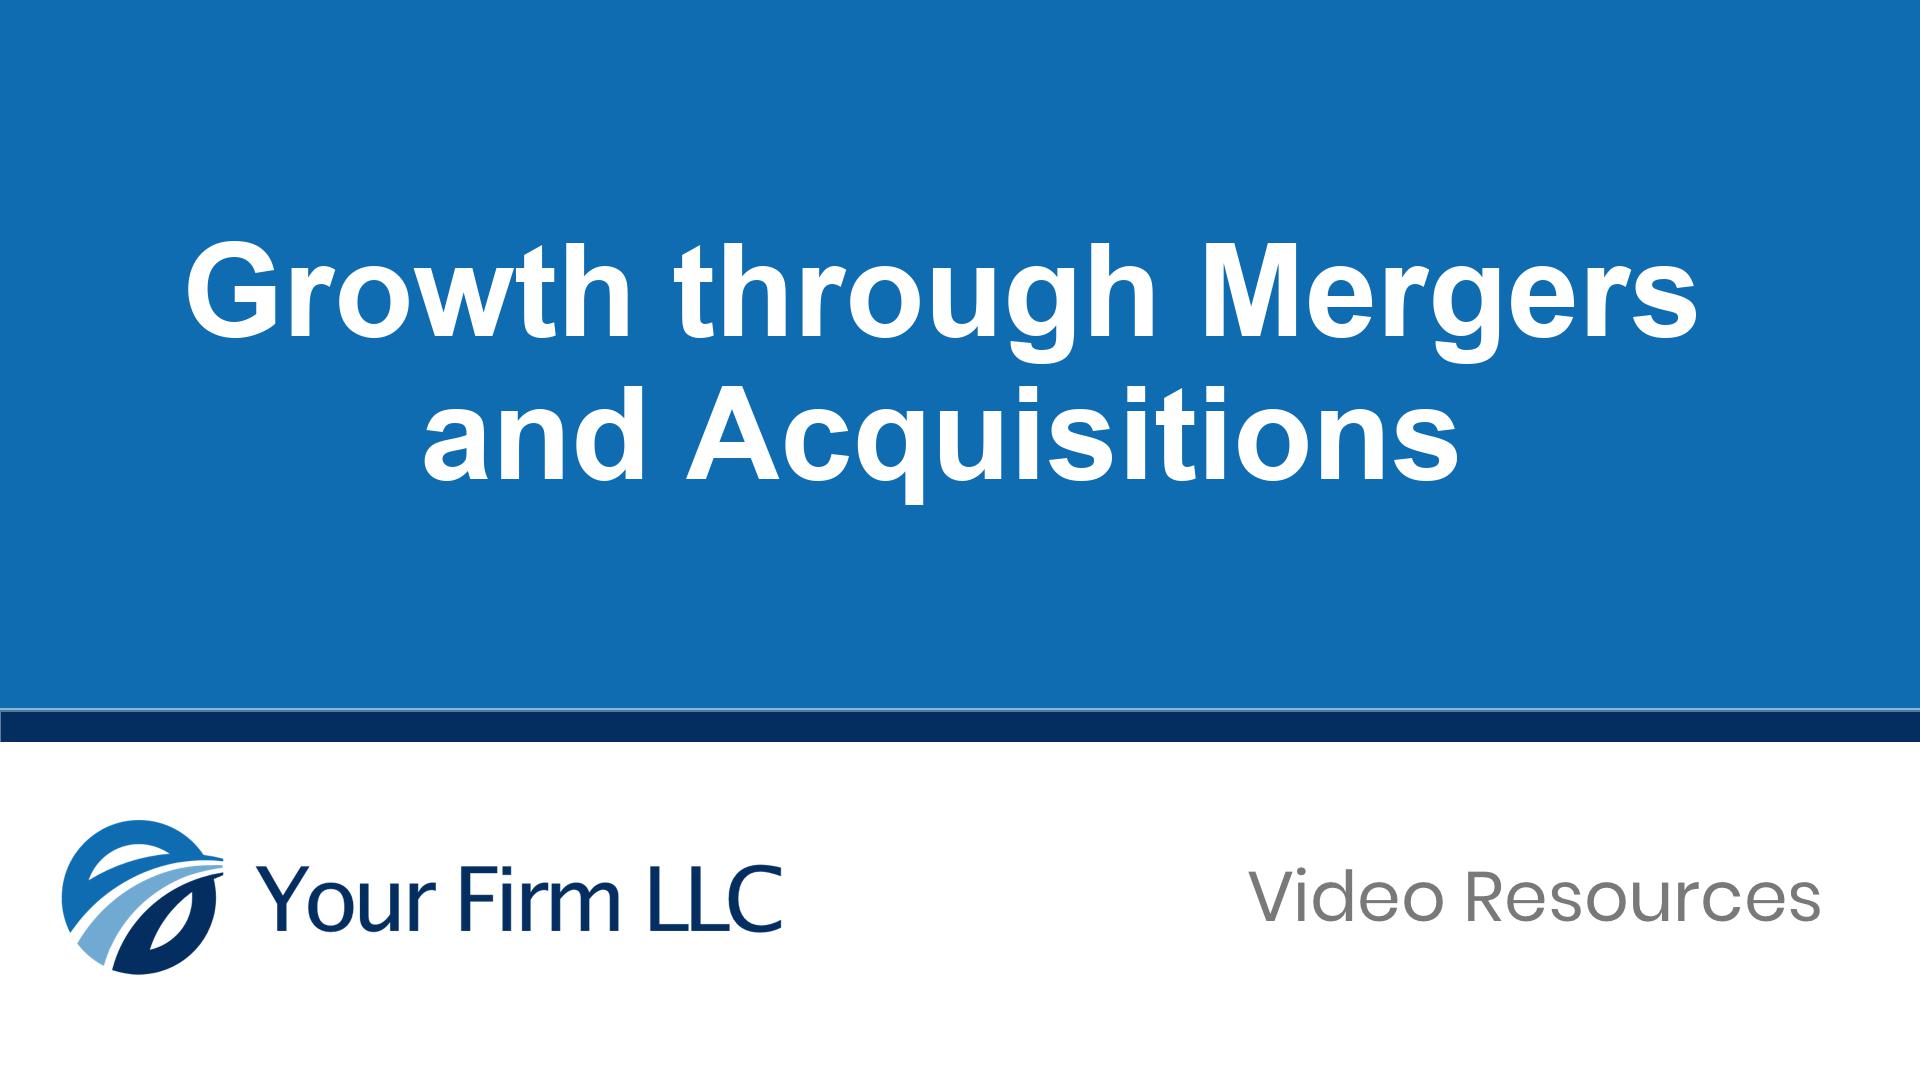 Growth through Mergers and Acquisitions